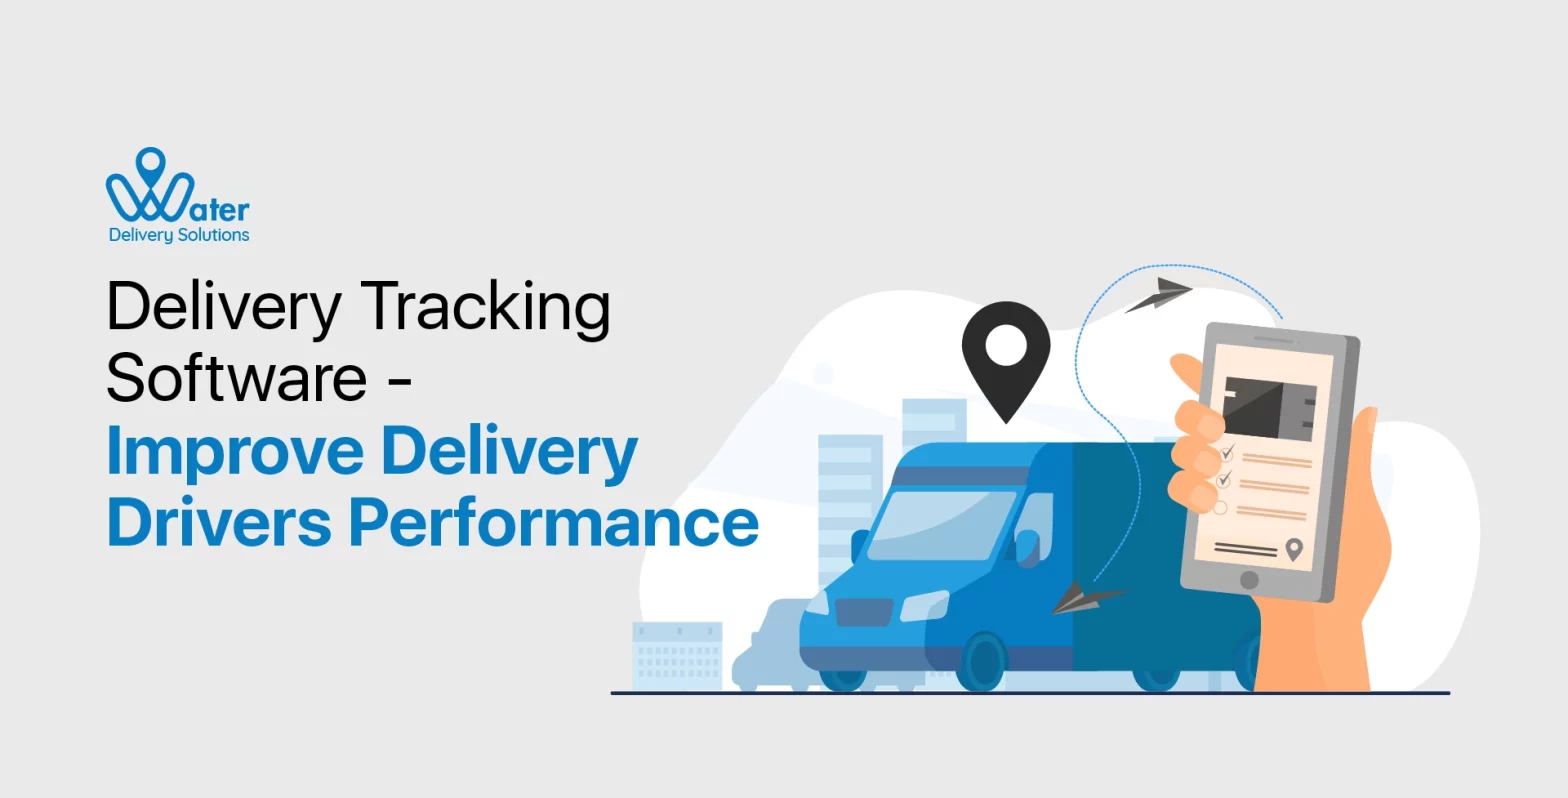 wds-founded-by-ravi-garg-website-insights-water-delivery-tracking-software-improve-delivery-drivers-performance